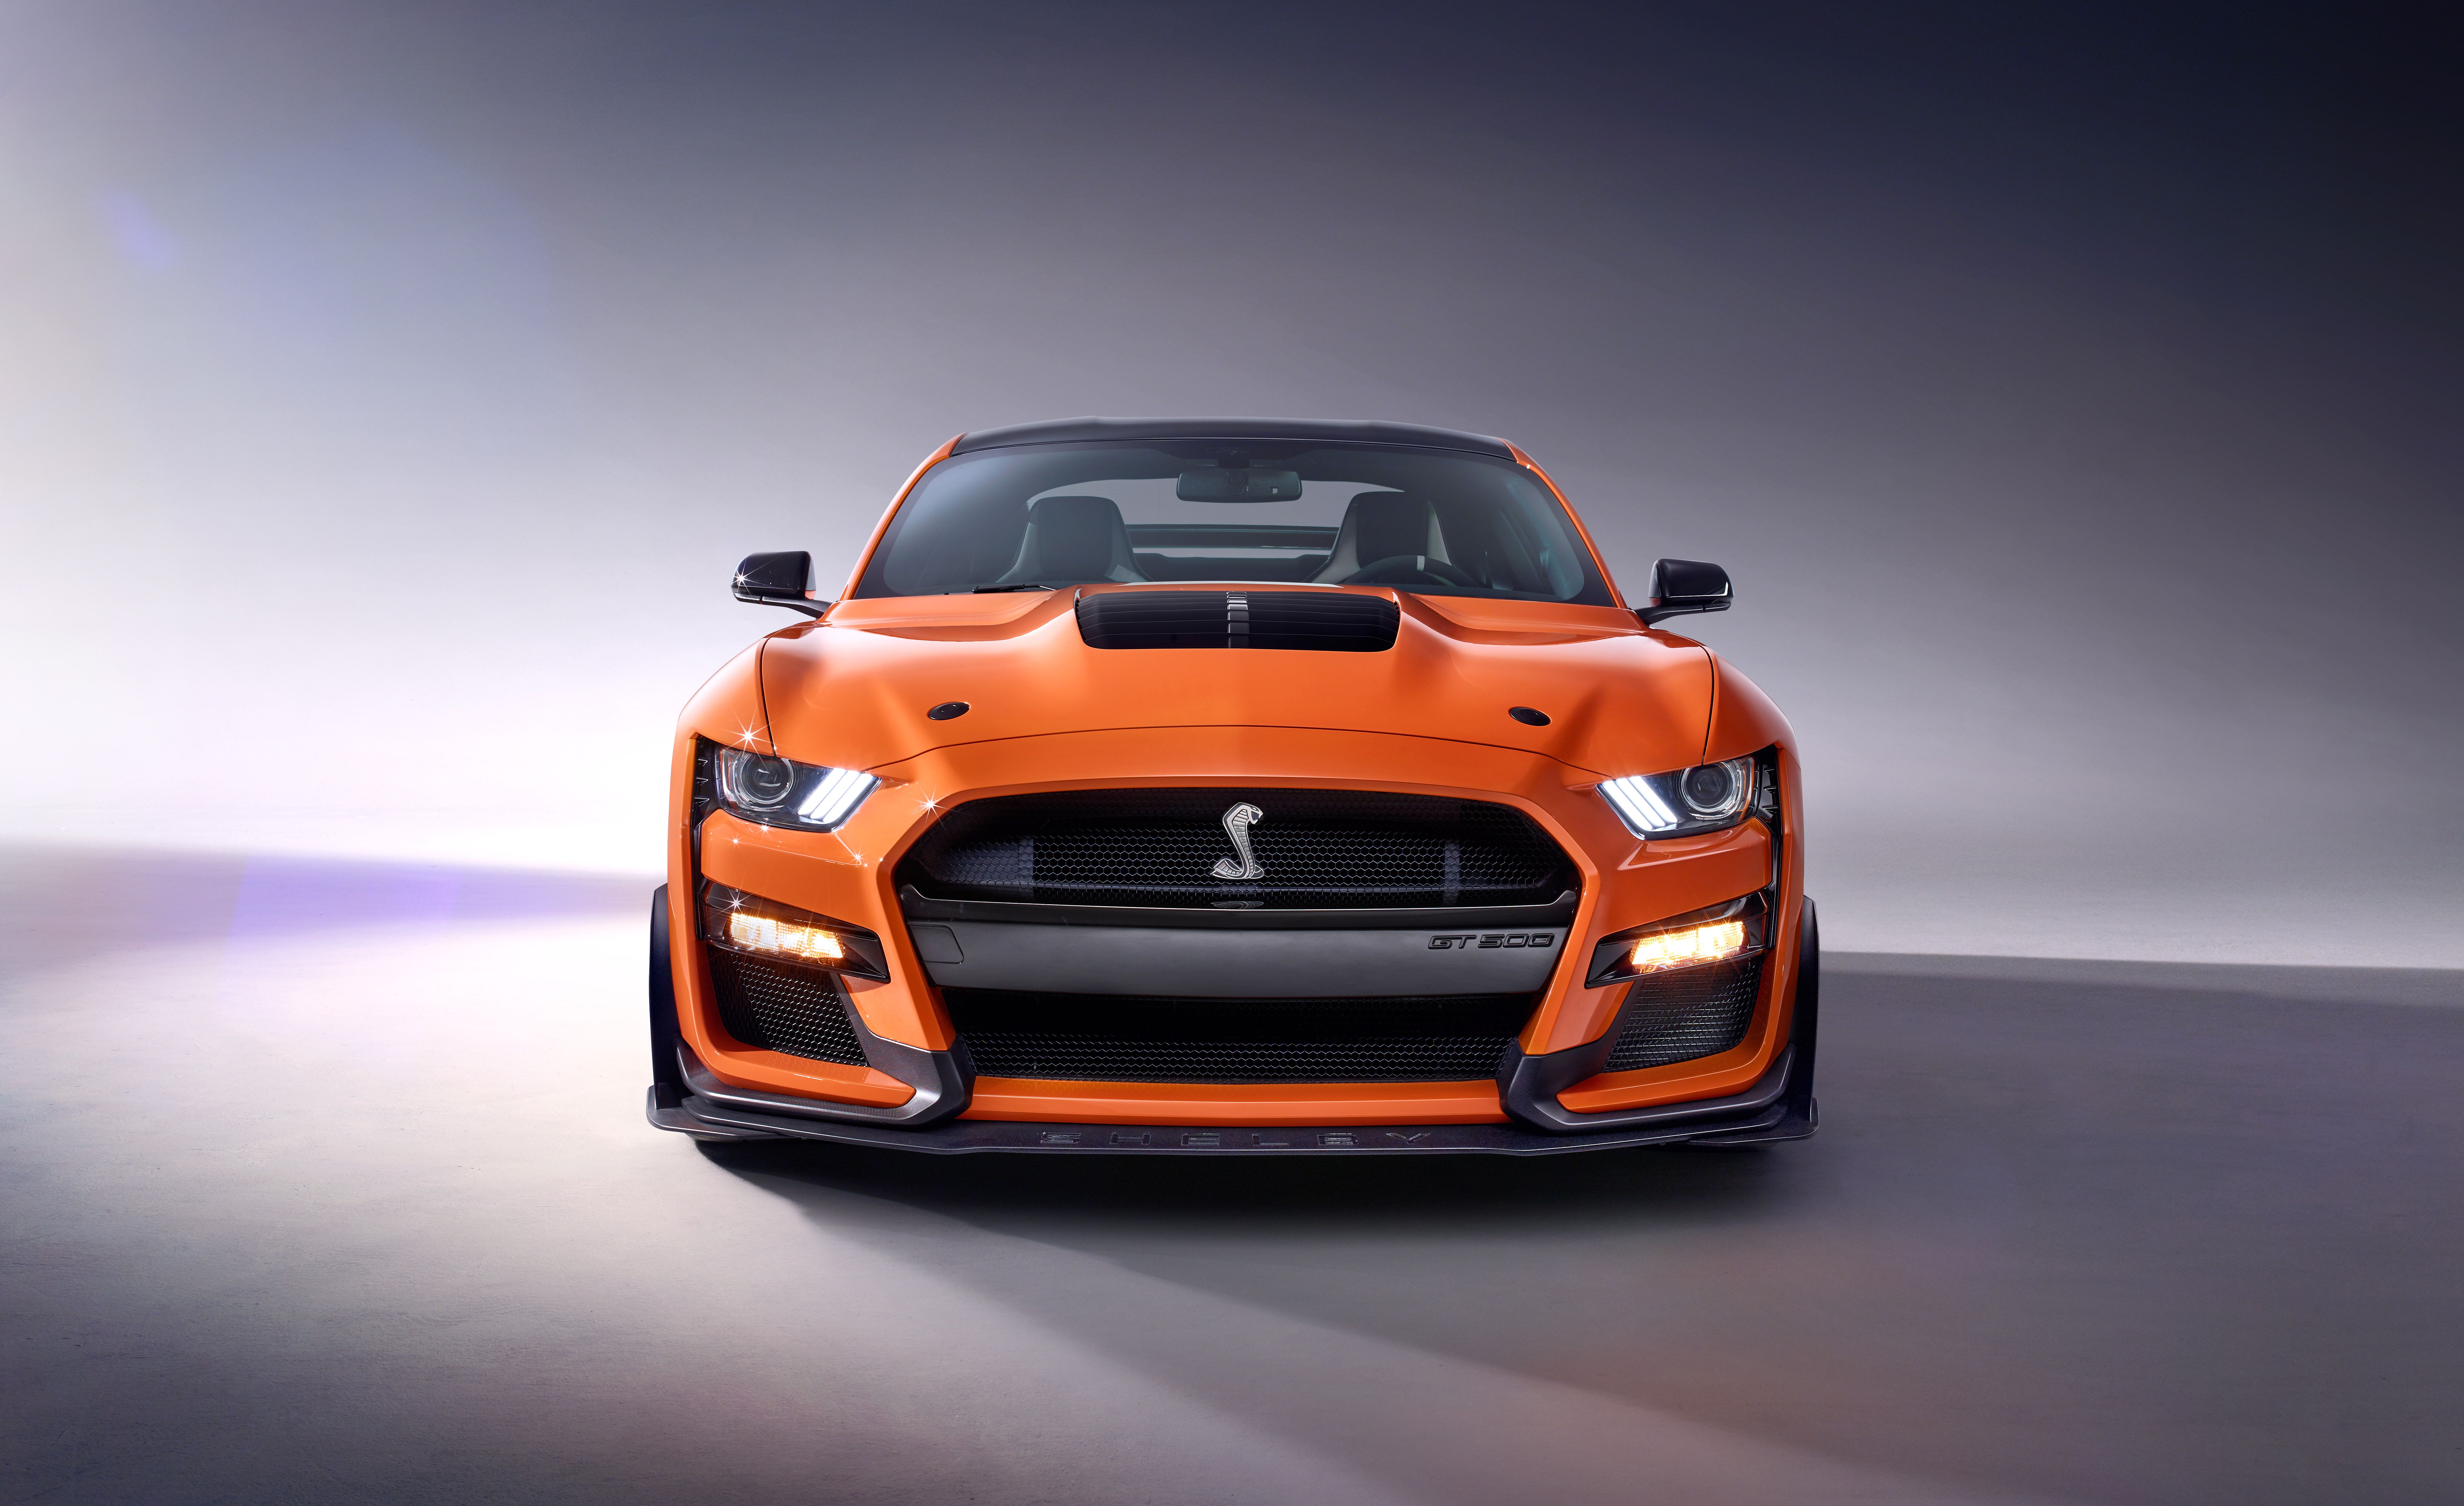 2020 Ford Mustang Shelby Gt500 Revealed Supercharged V 8 Muscle Car